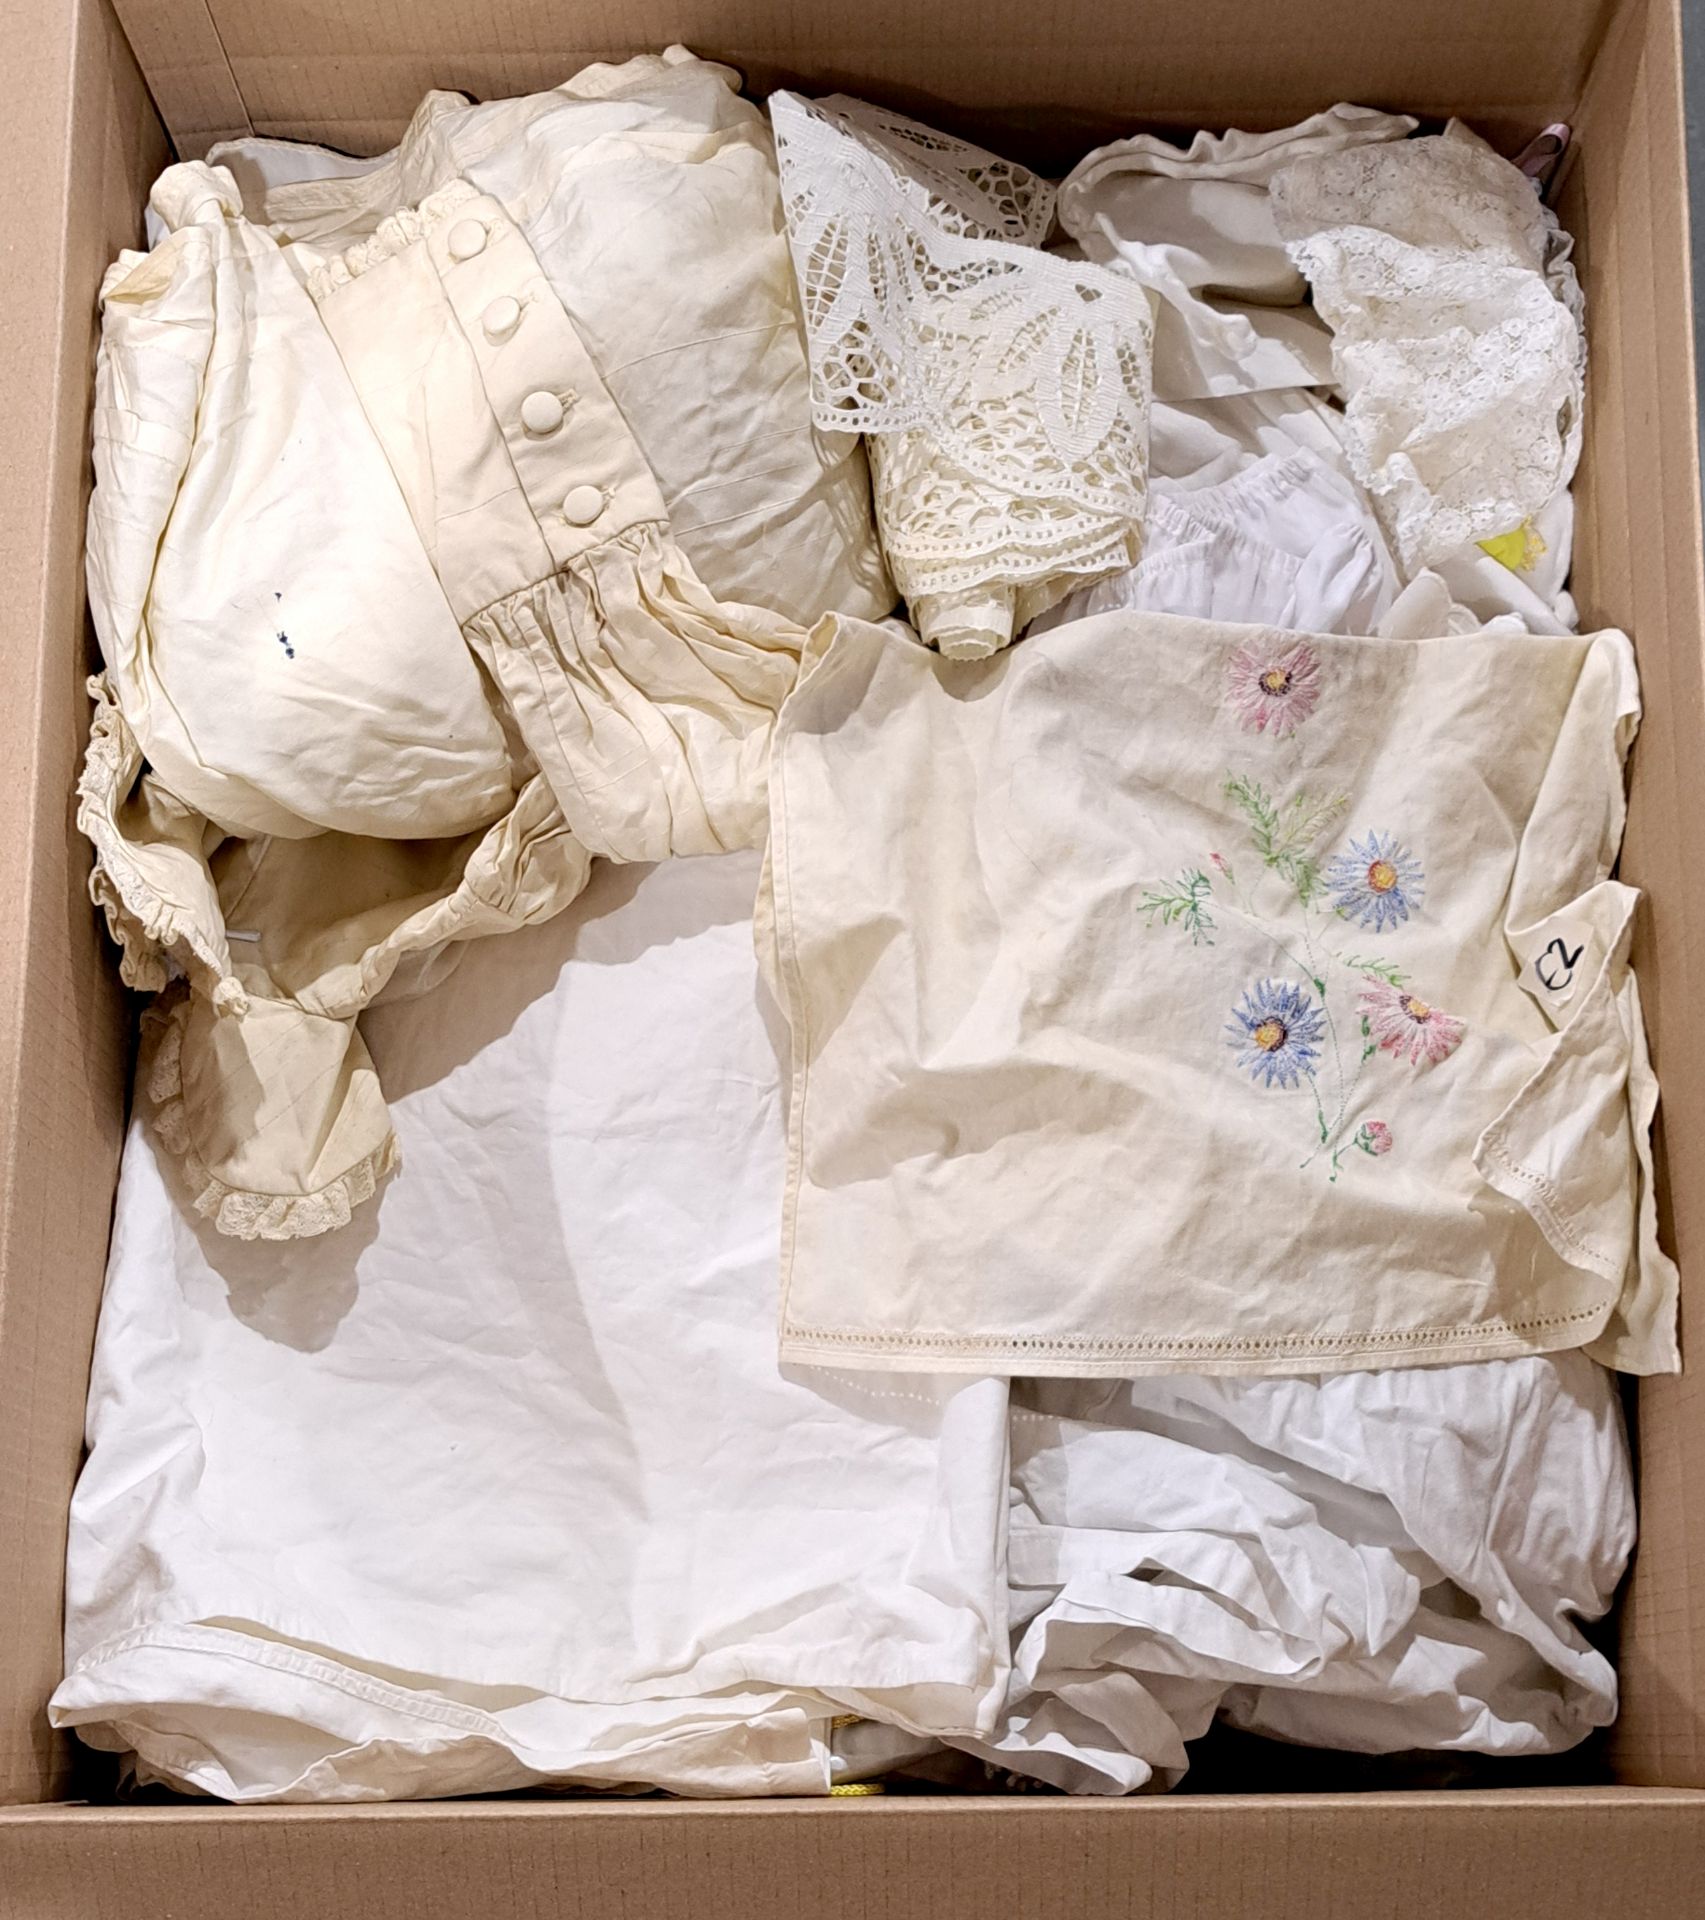 Antique doll's pram plus doll's/children's clothing, including whitewear - Image 2 of 5